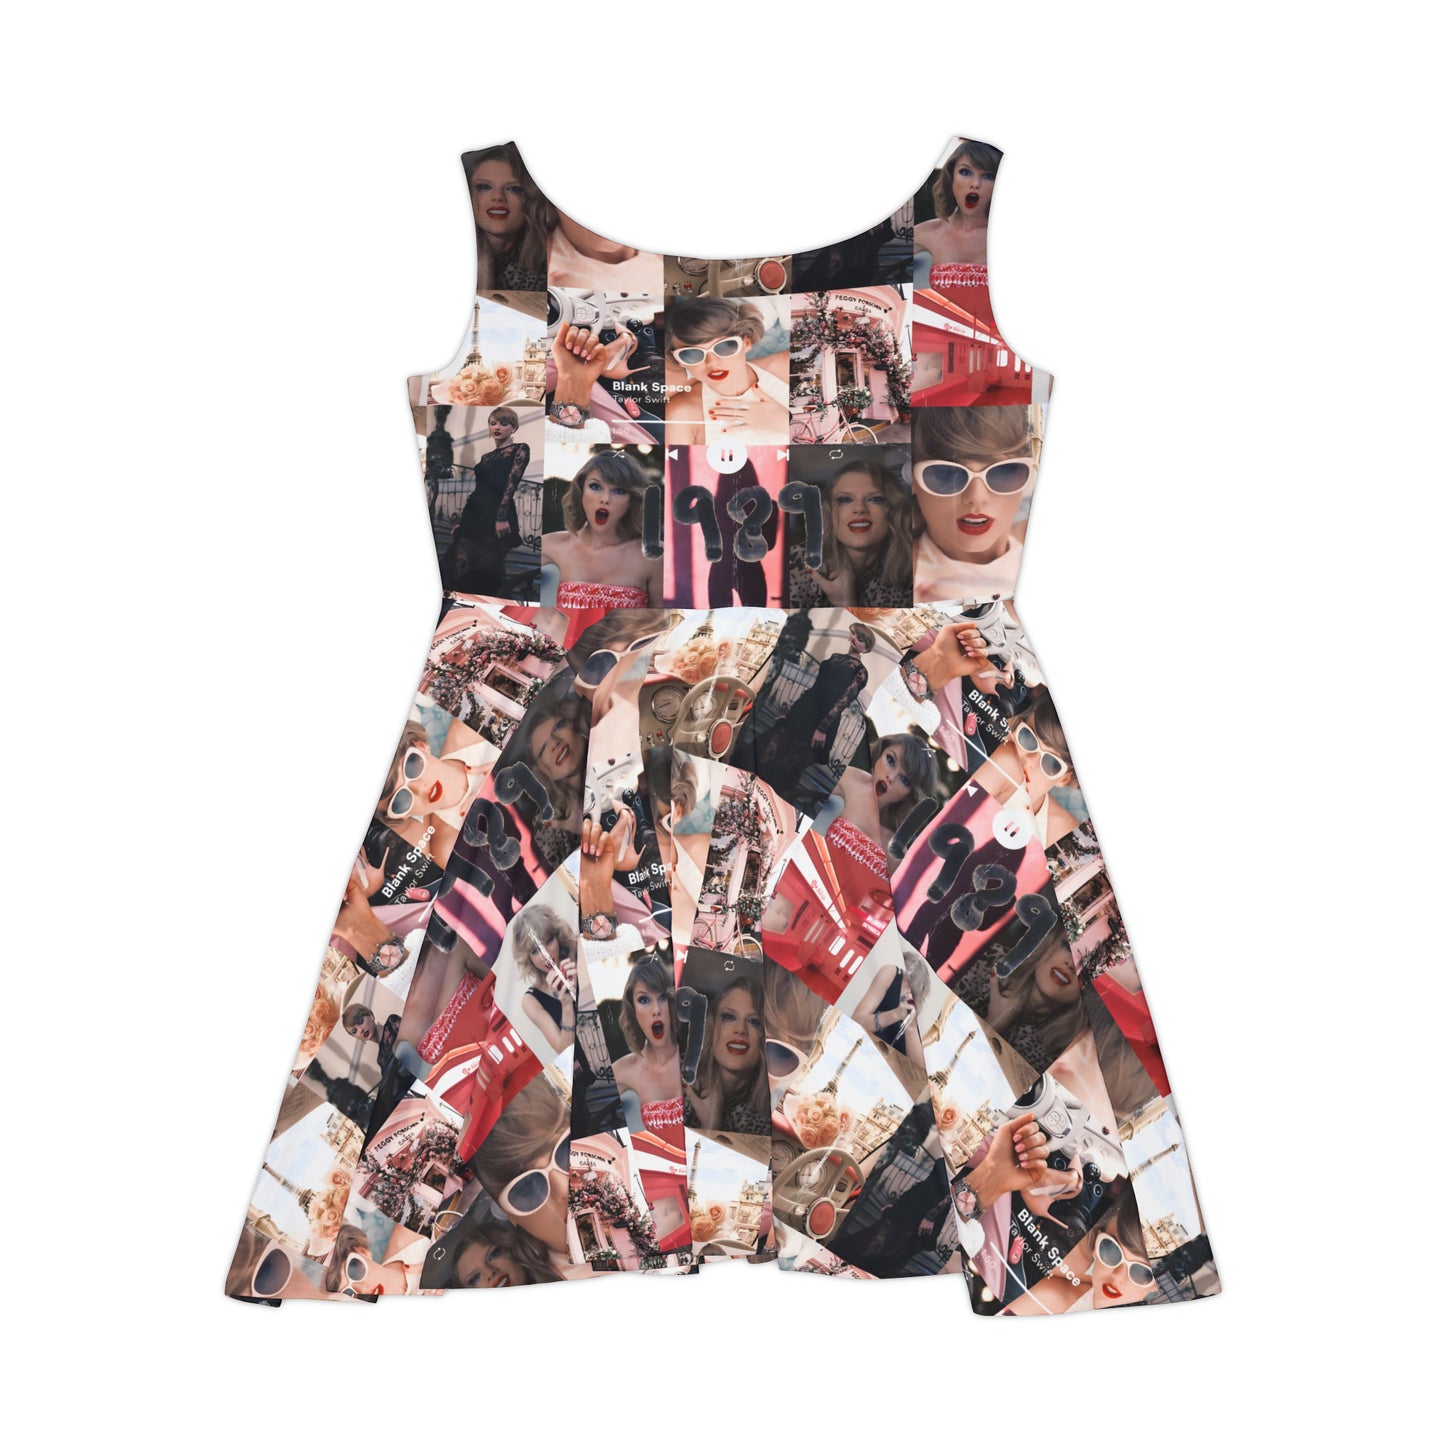 Taylor Swift 1989 Blank Space Collage Women's Skater Dress